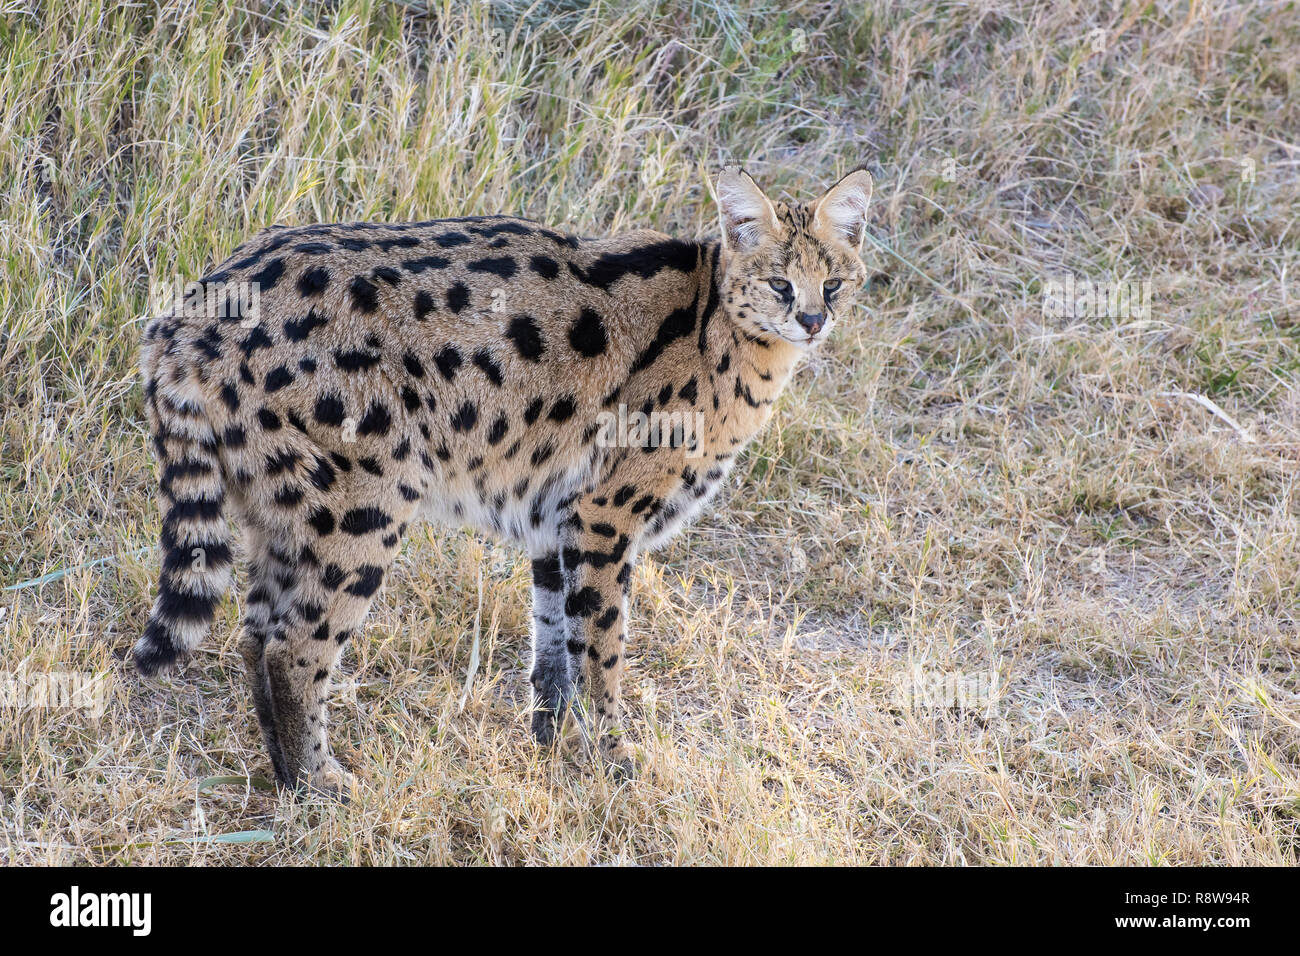 Serval Standing in a Grassy Field Stock Photo